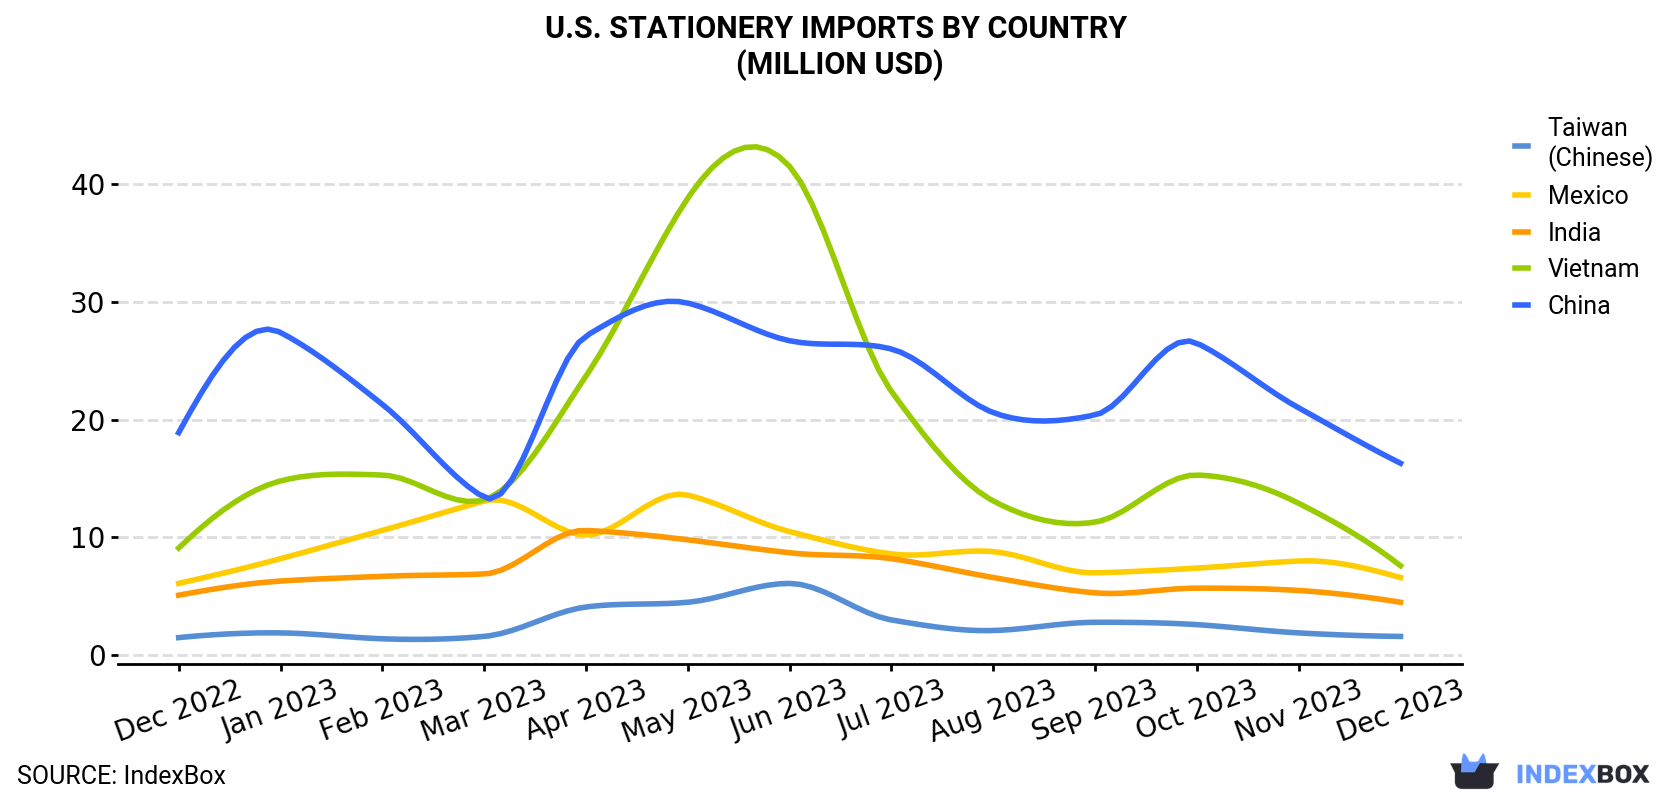 U.S. Stationery Imports By Country (Million USD)